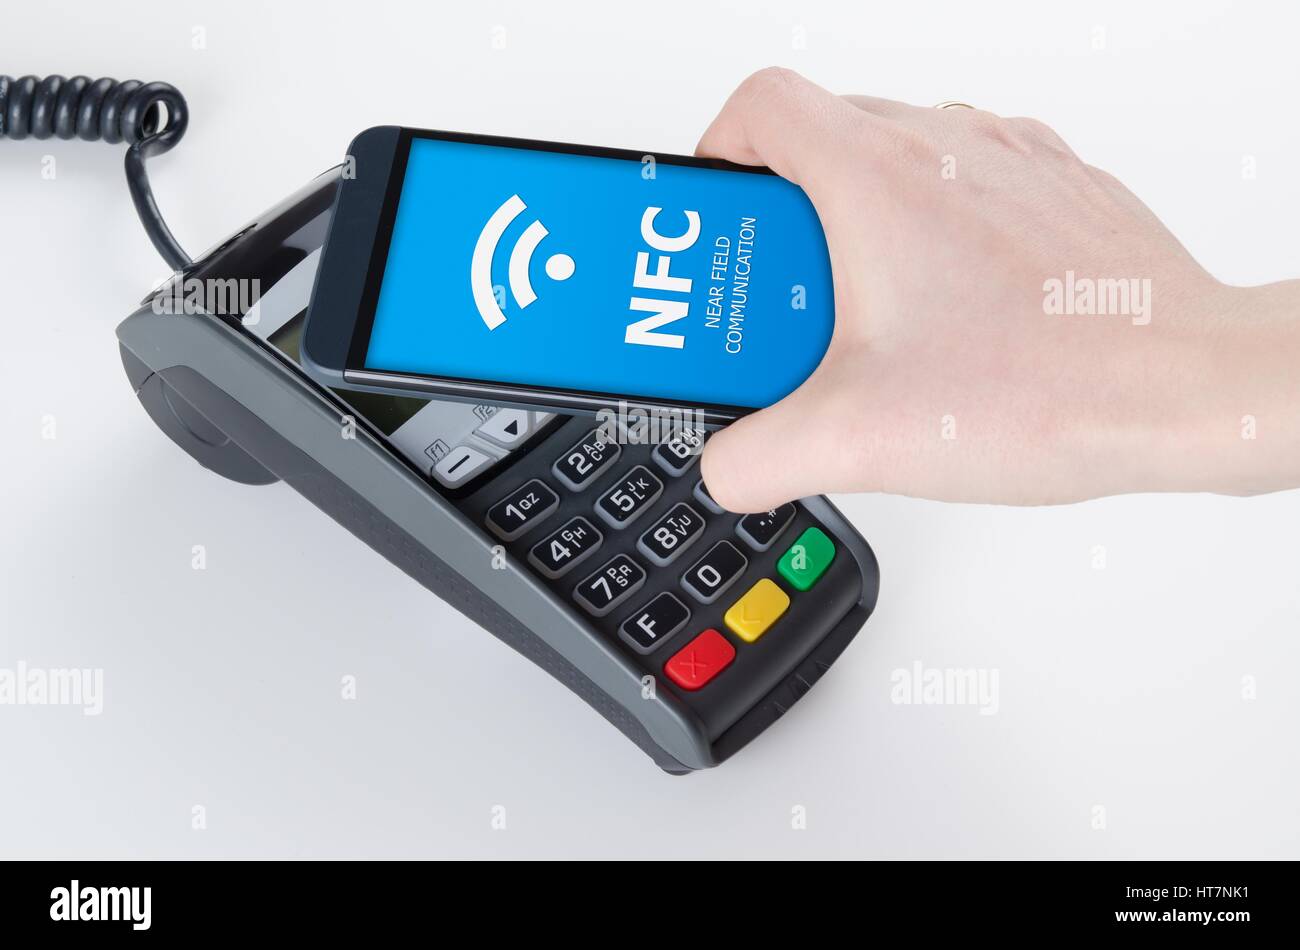 Mobile payment with NFC near field communication technology Stock Photo